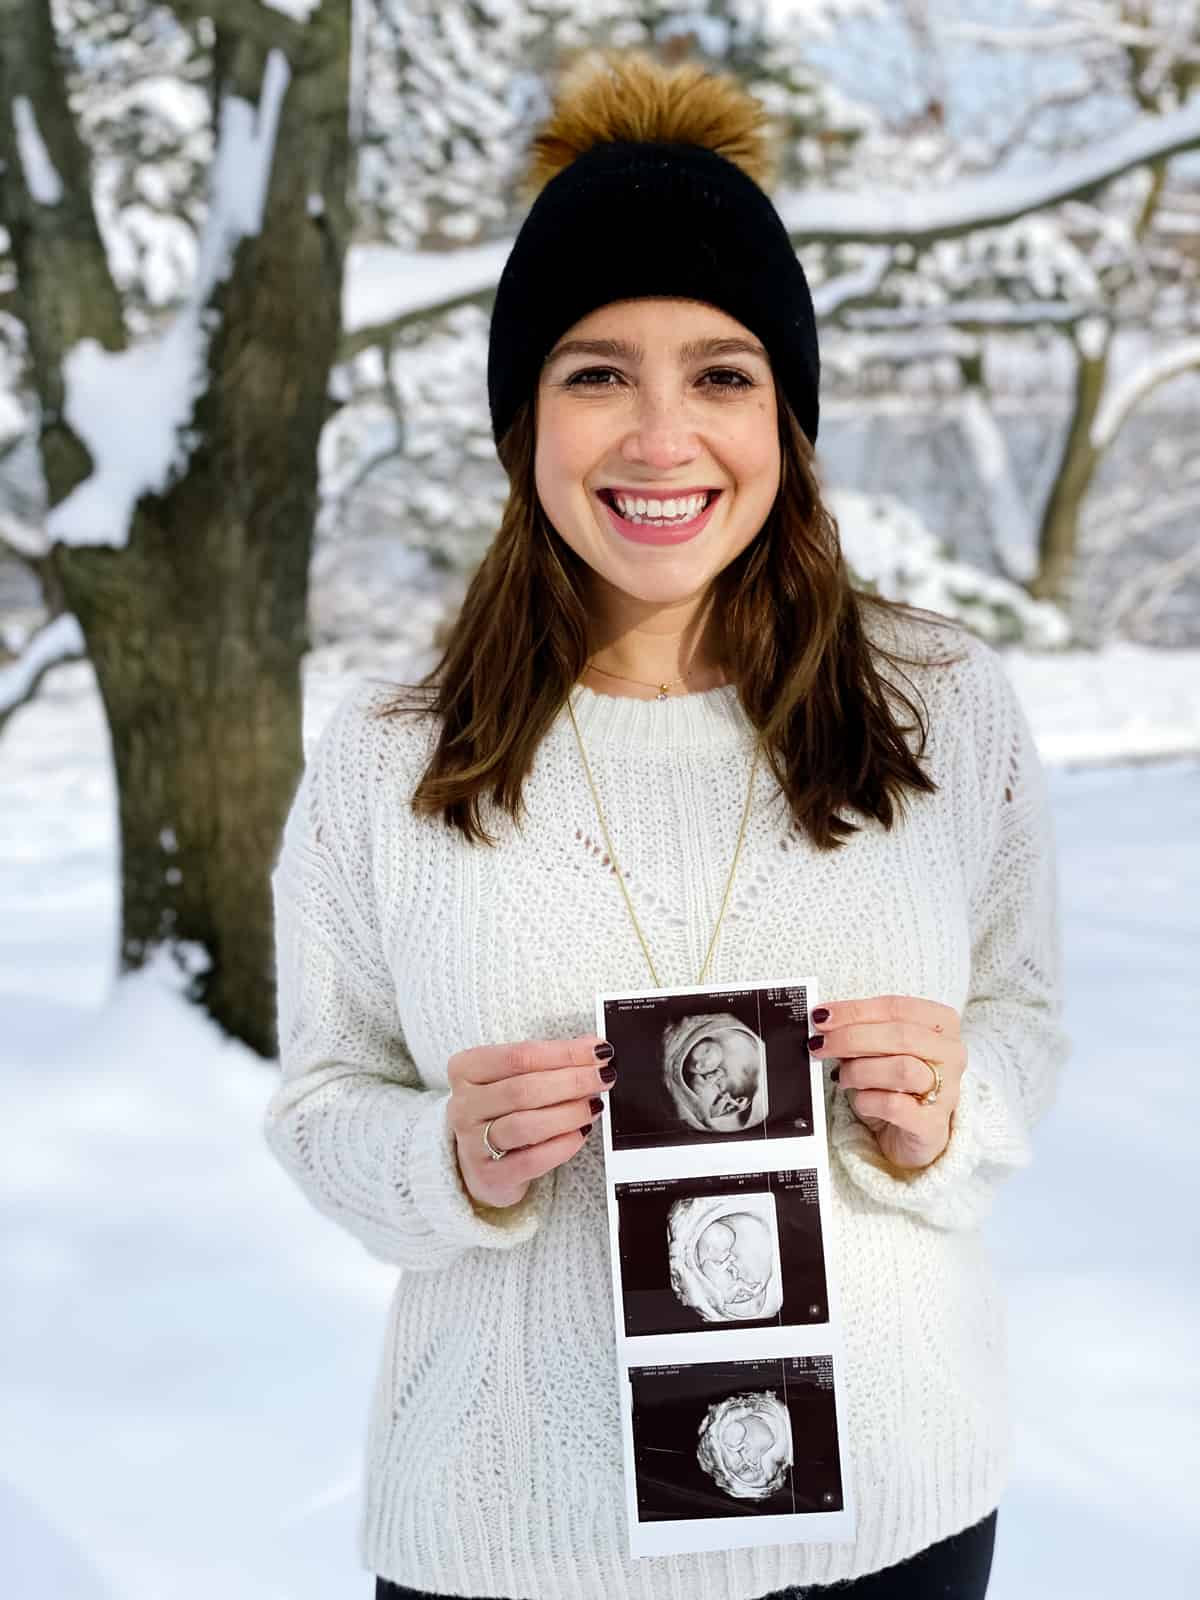 pregnant woman wearing winter hat holding ultrasound photos with snow in background